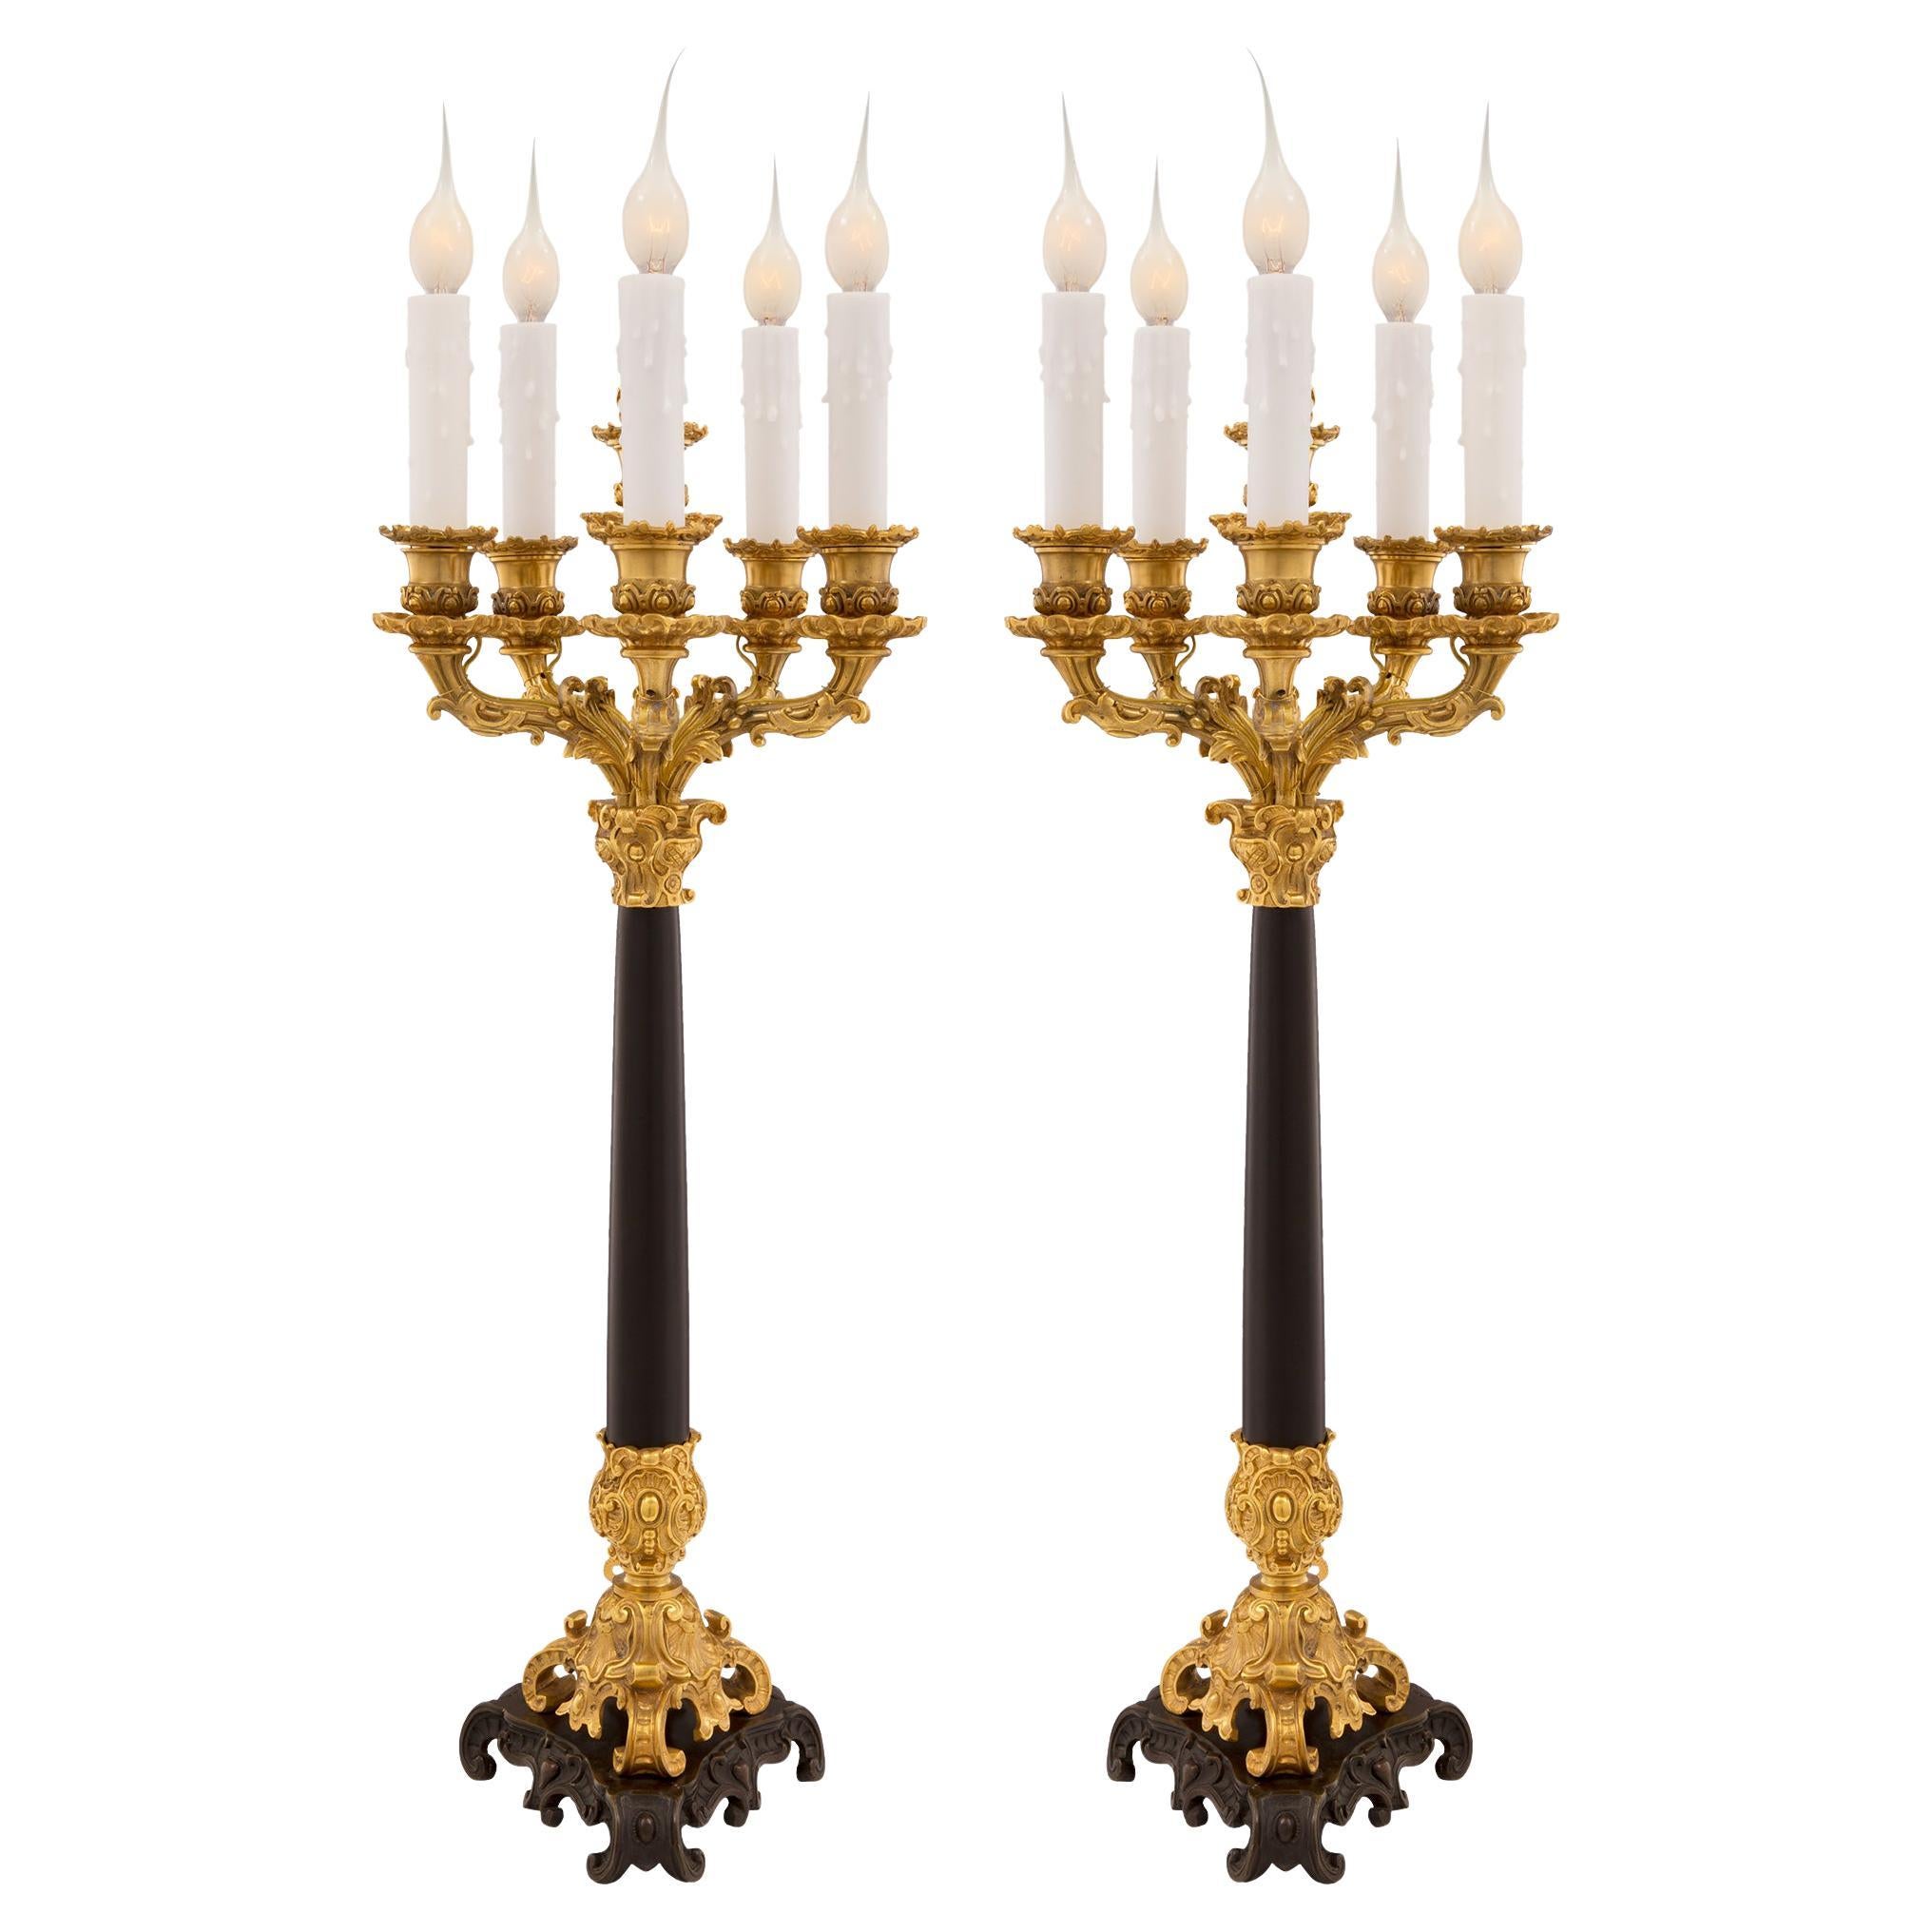 Pair of French Mid-19th Century Neoclassical Bronze, Ormolu and Marble Lamps